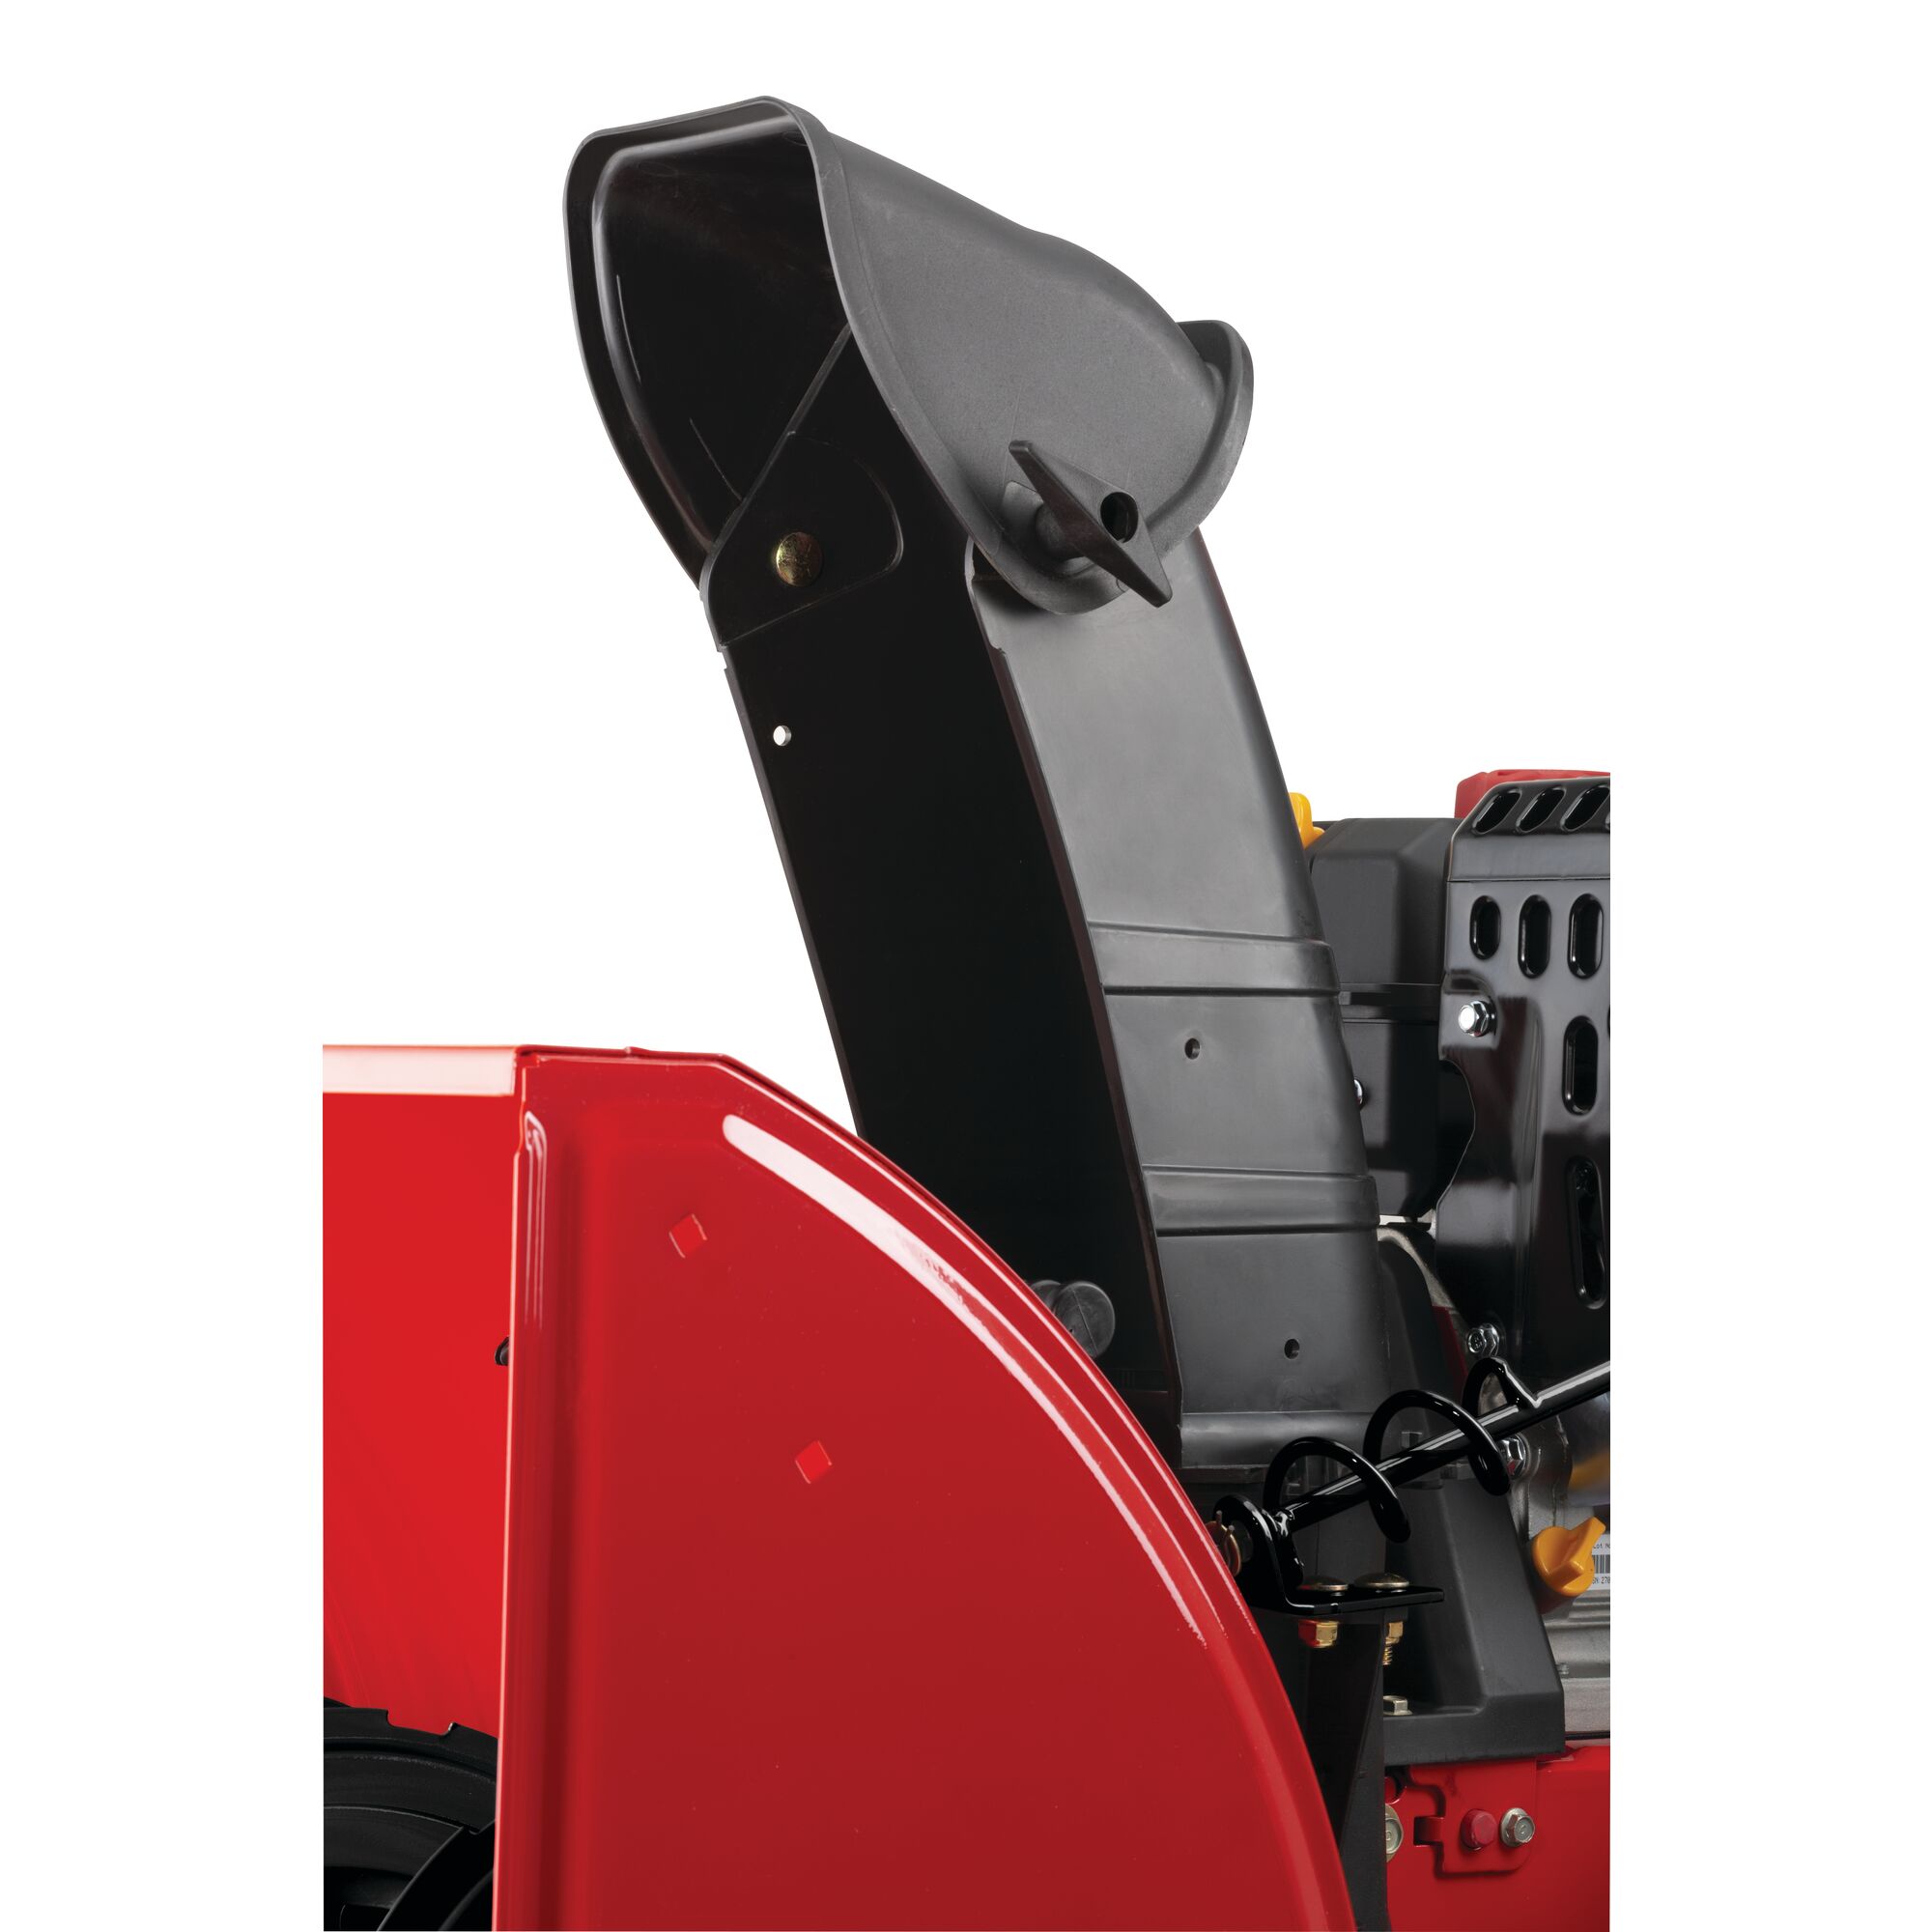 Chute control feature in 24 inch 208 CC electric start two stage snow blower.